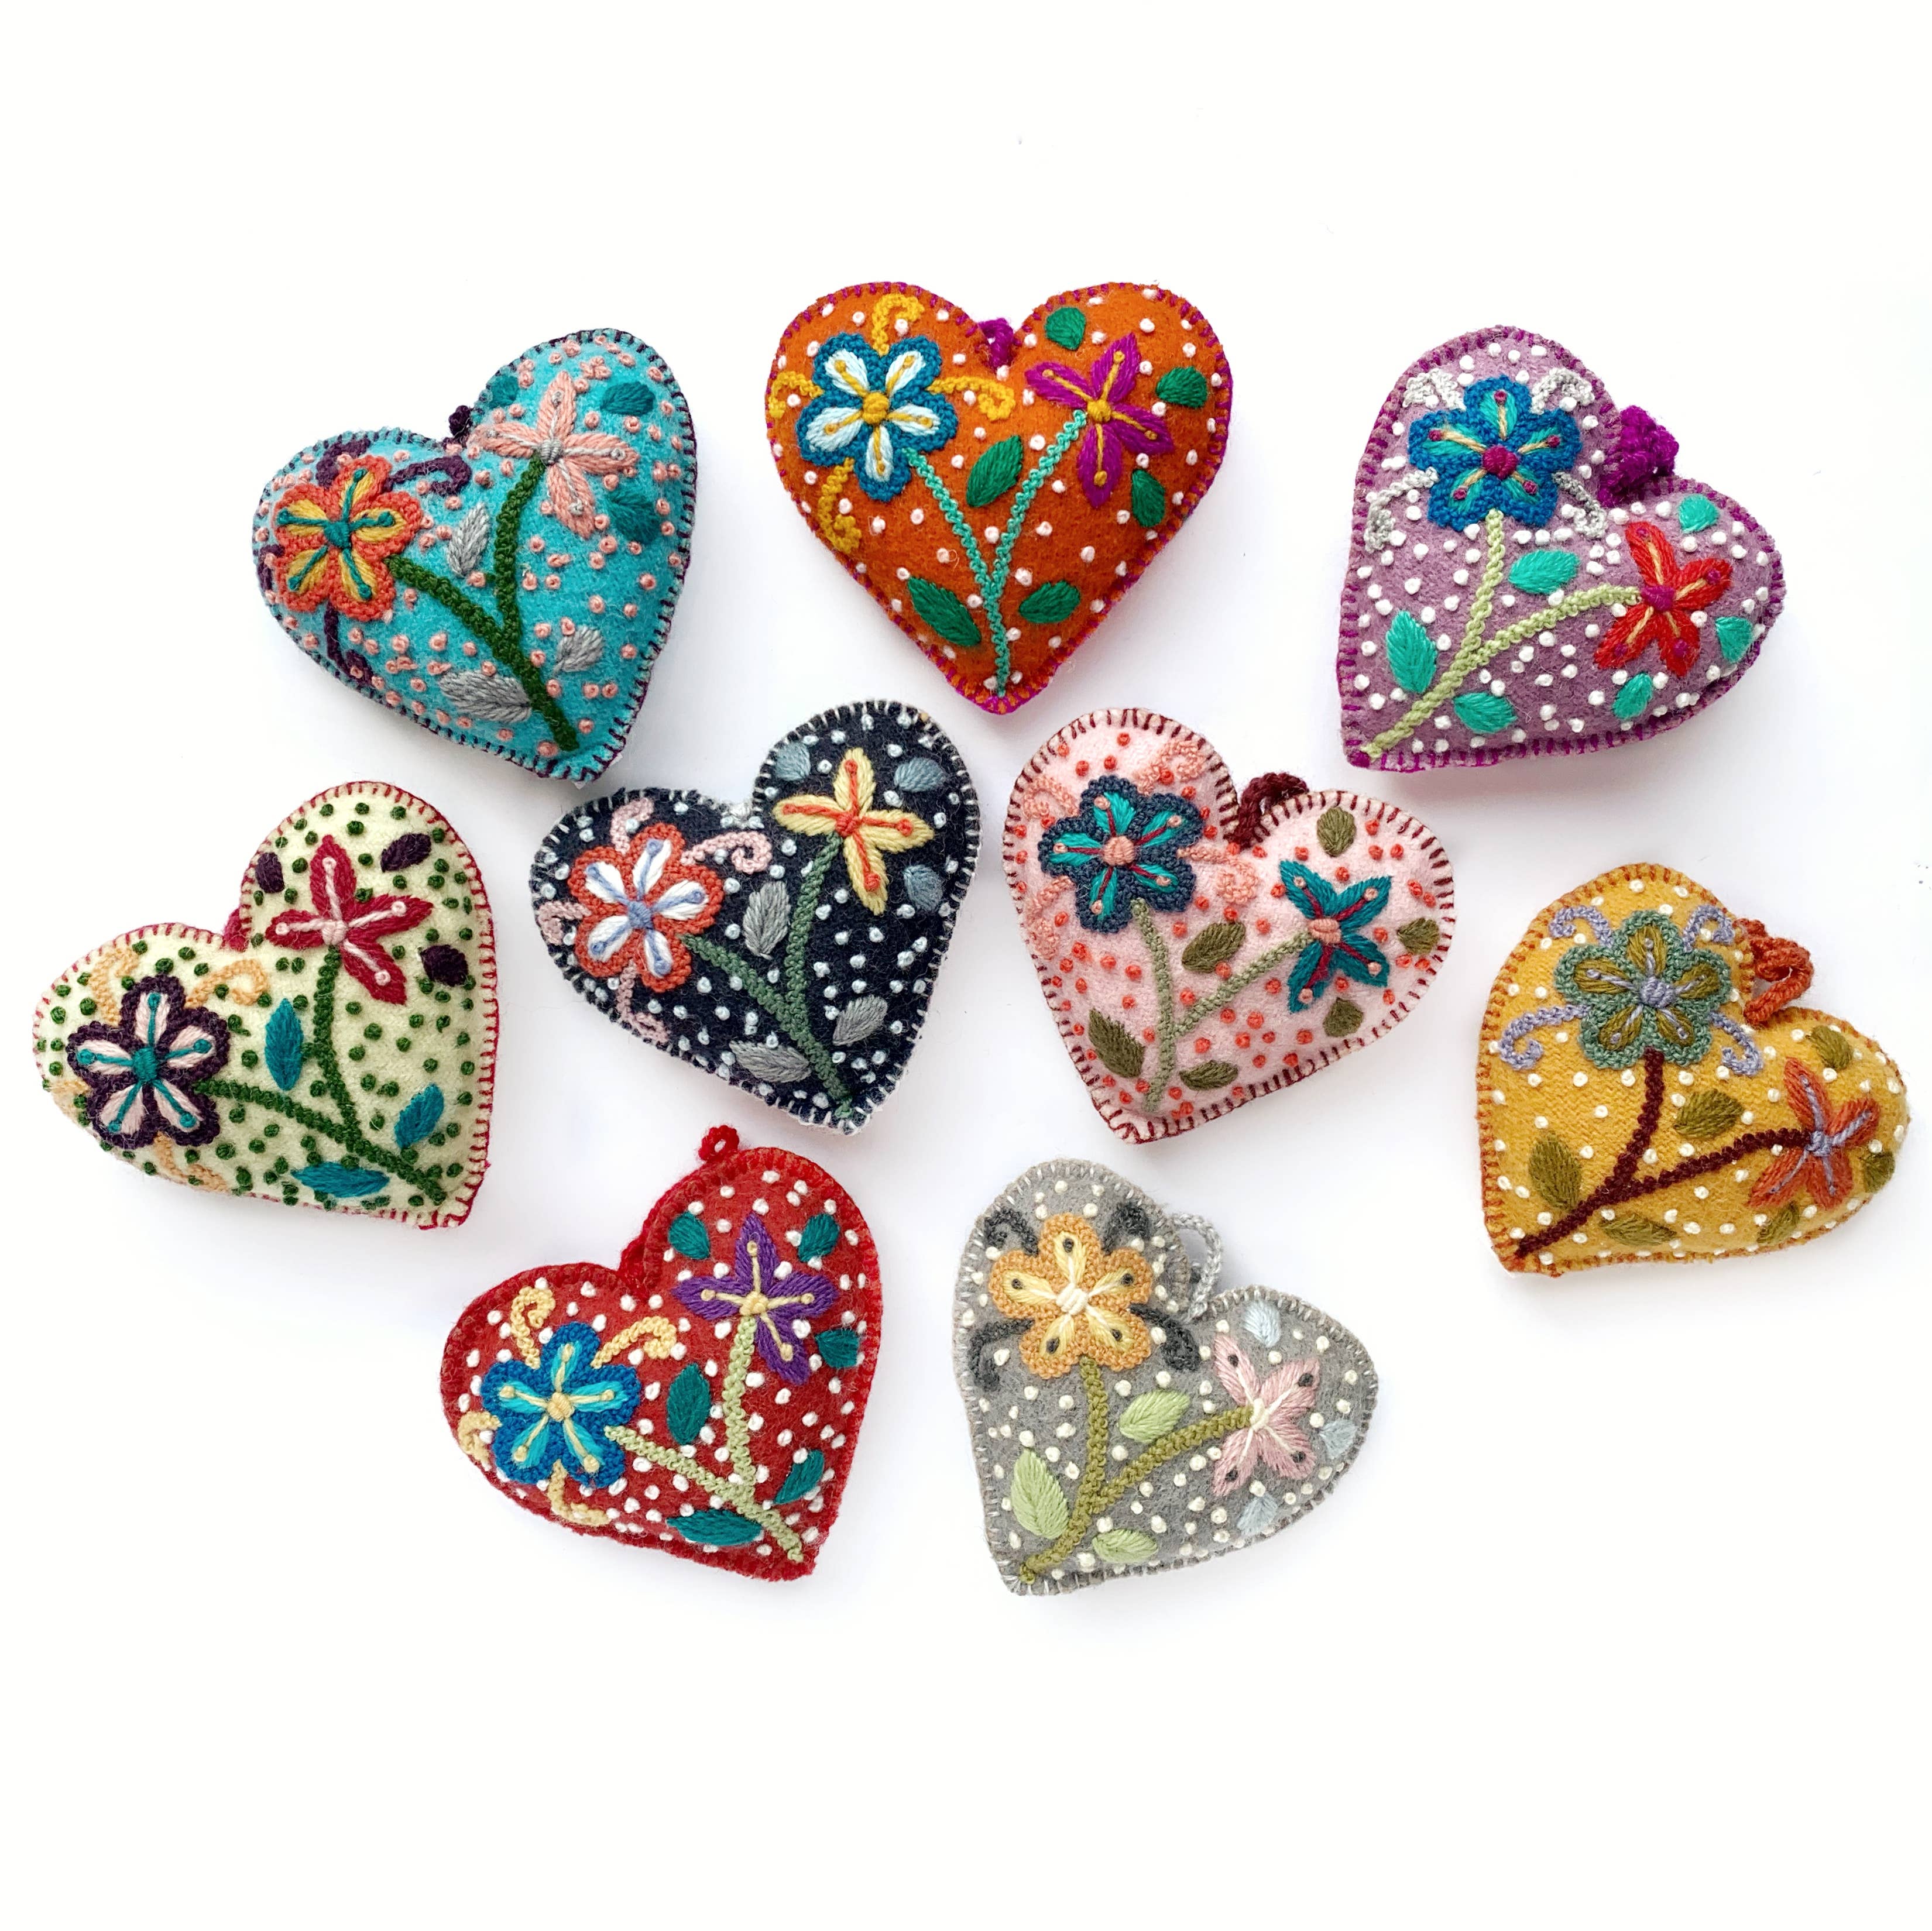 Colorful Embroidered Heart Ornament Variety, 12 Pack